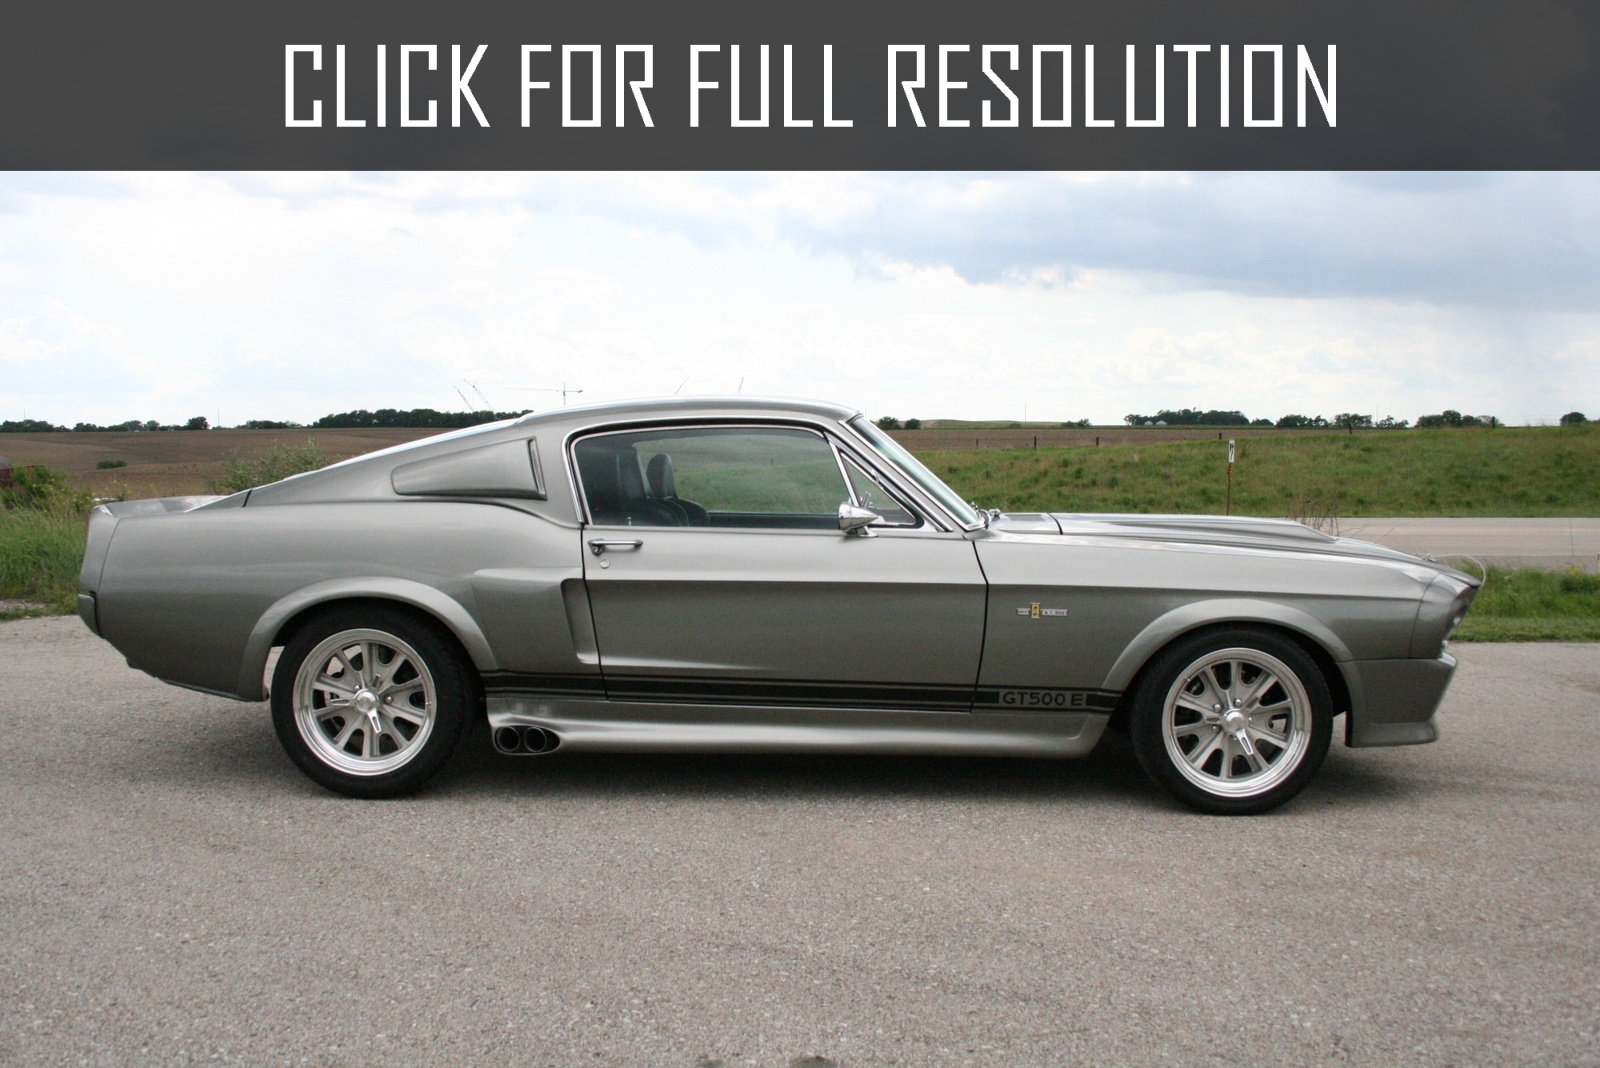 1967 Ford Mustang Shelby Gt500